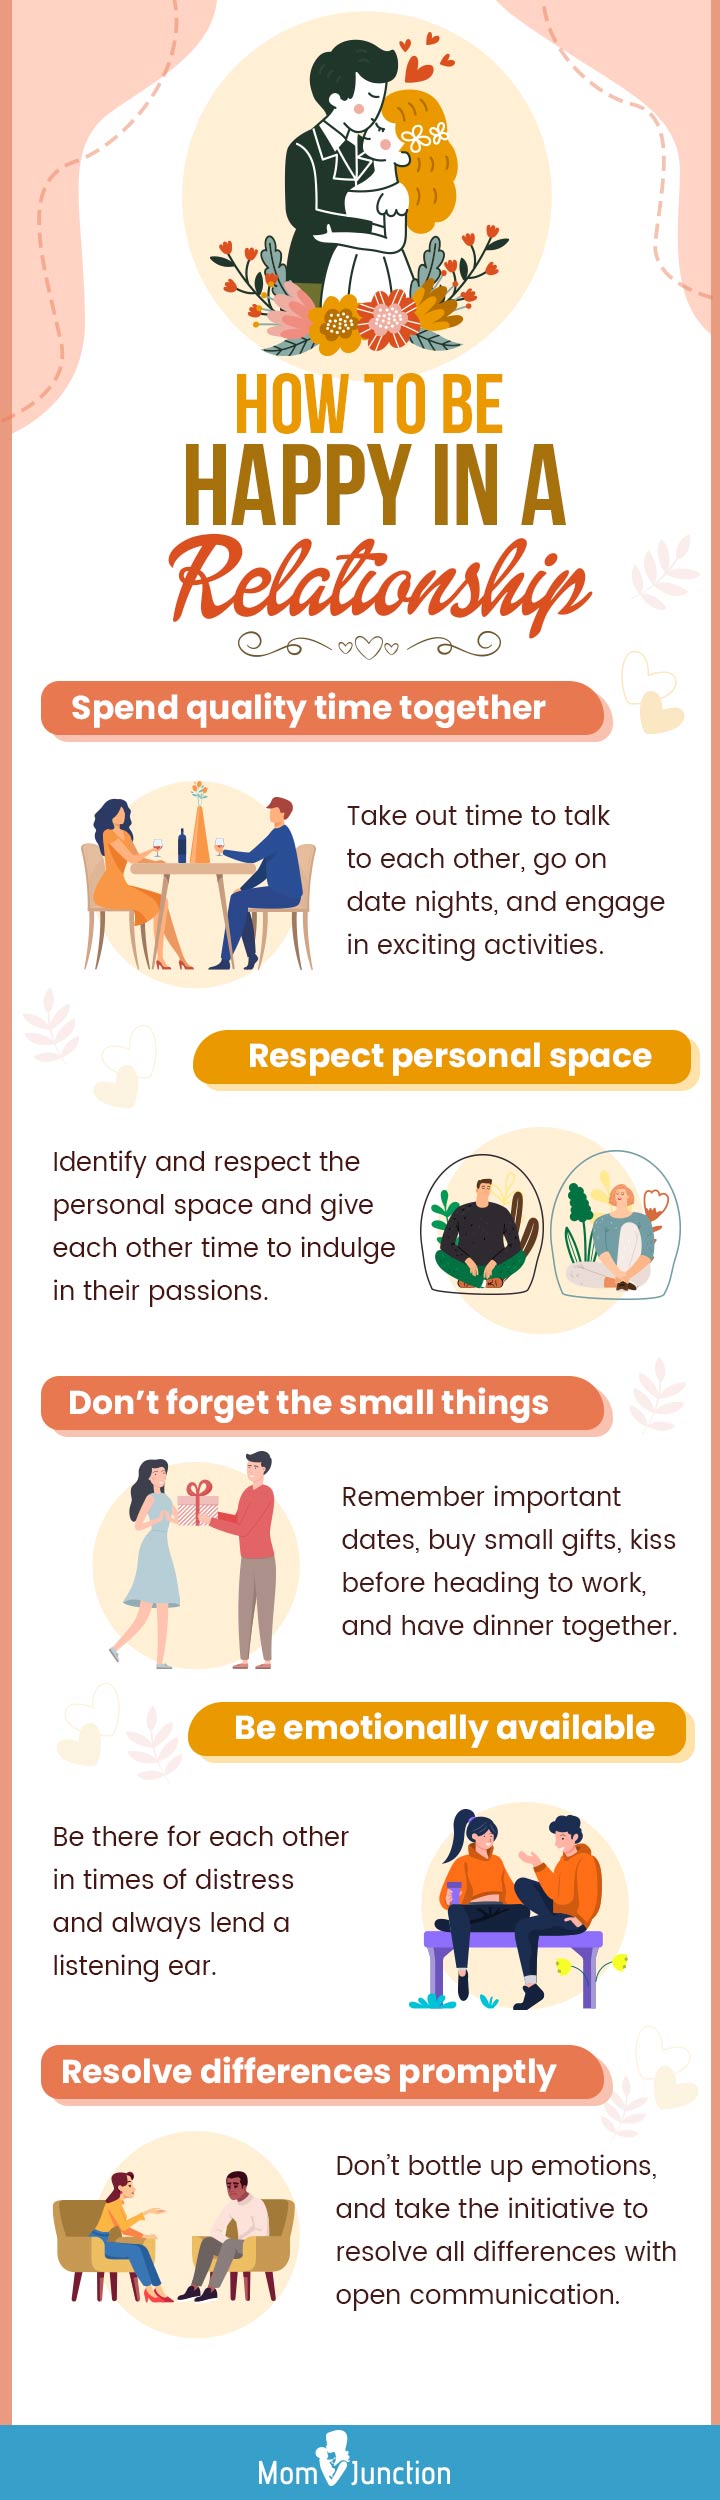 how to be happy in a relationship [infographic]